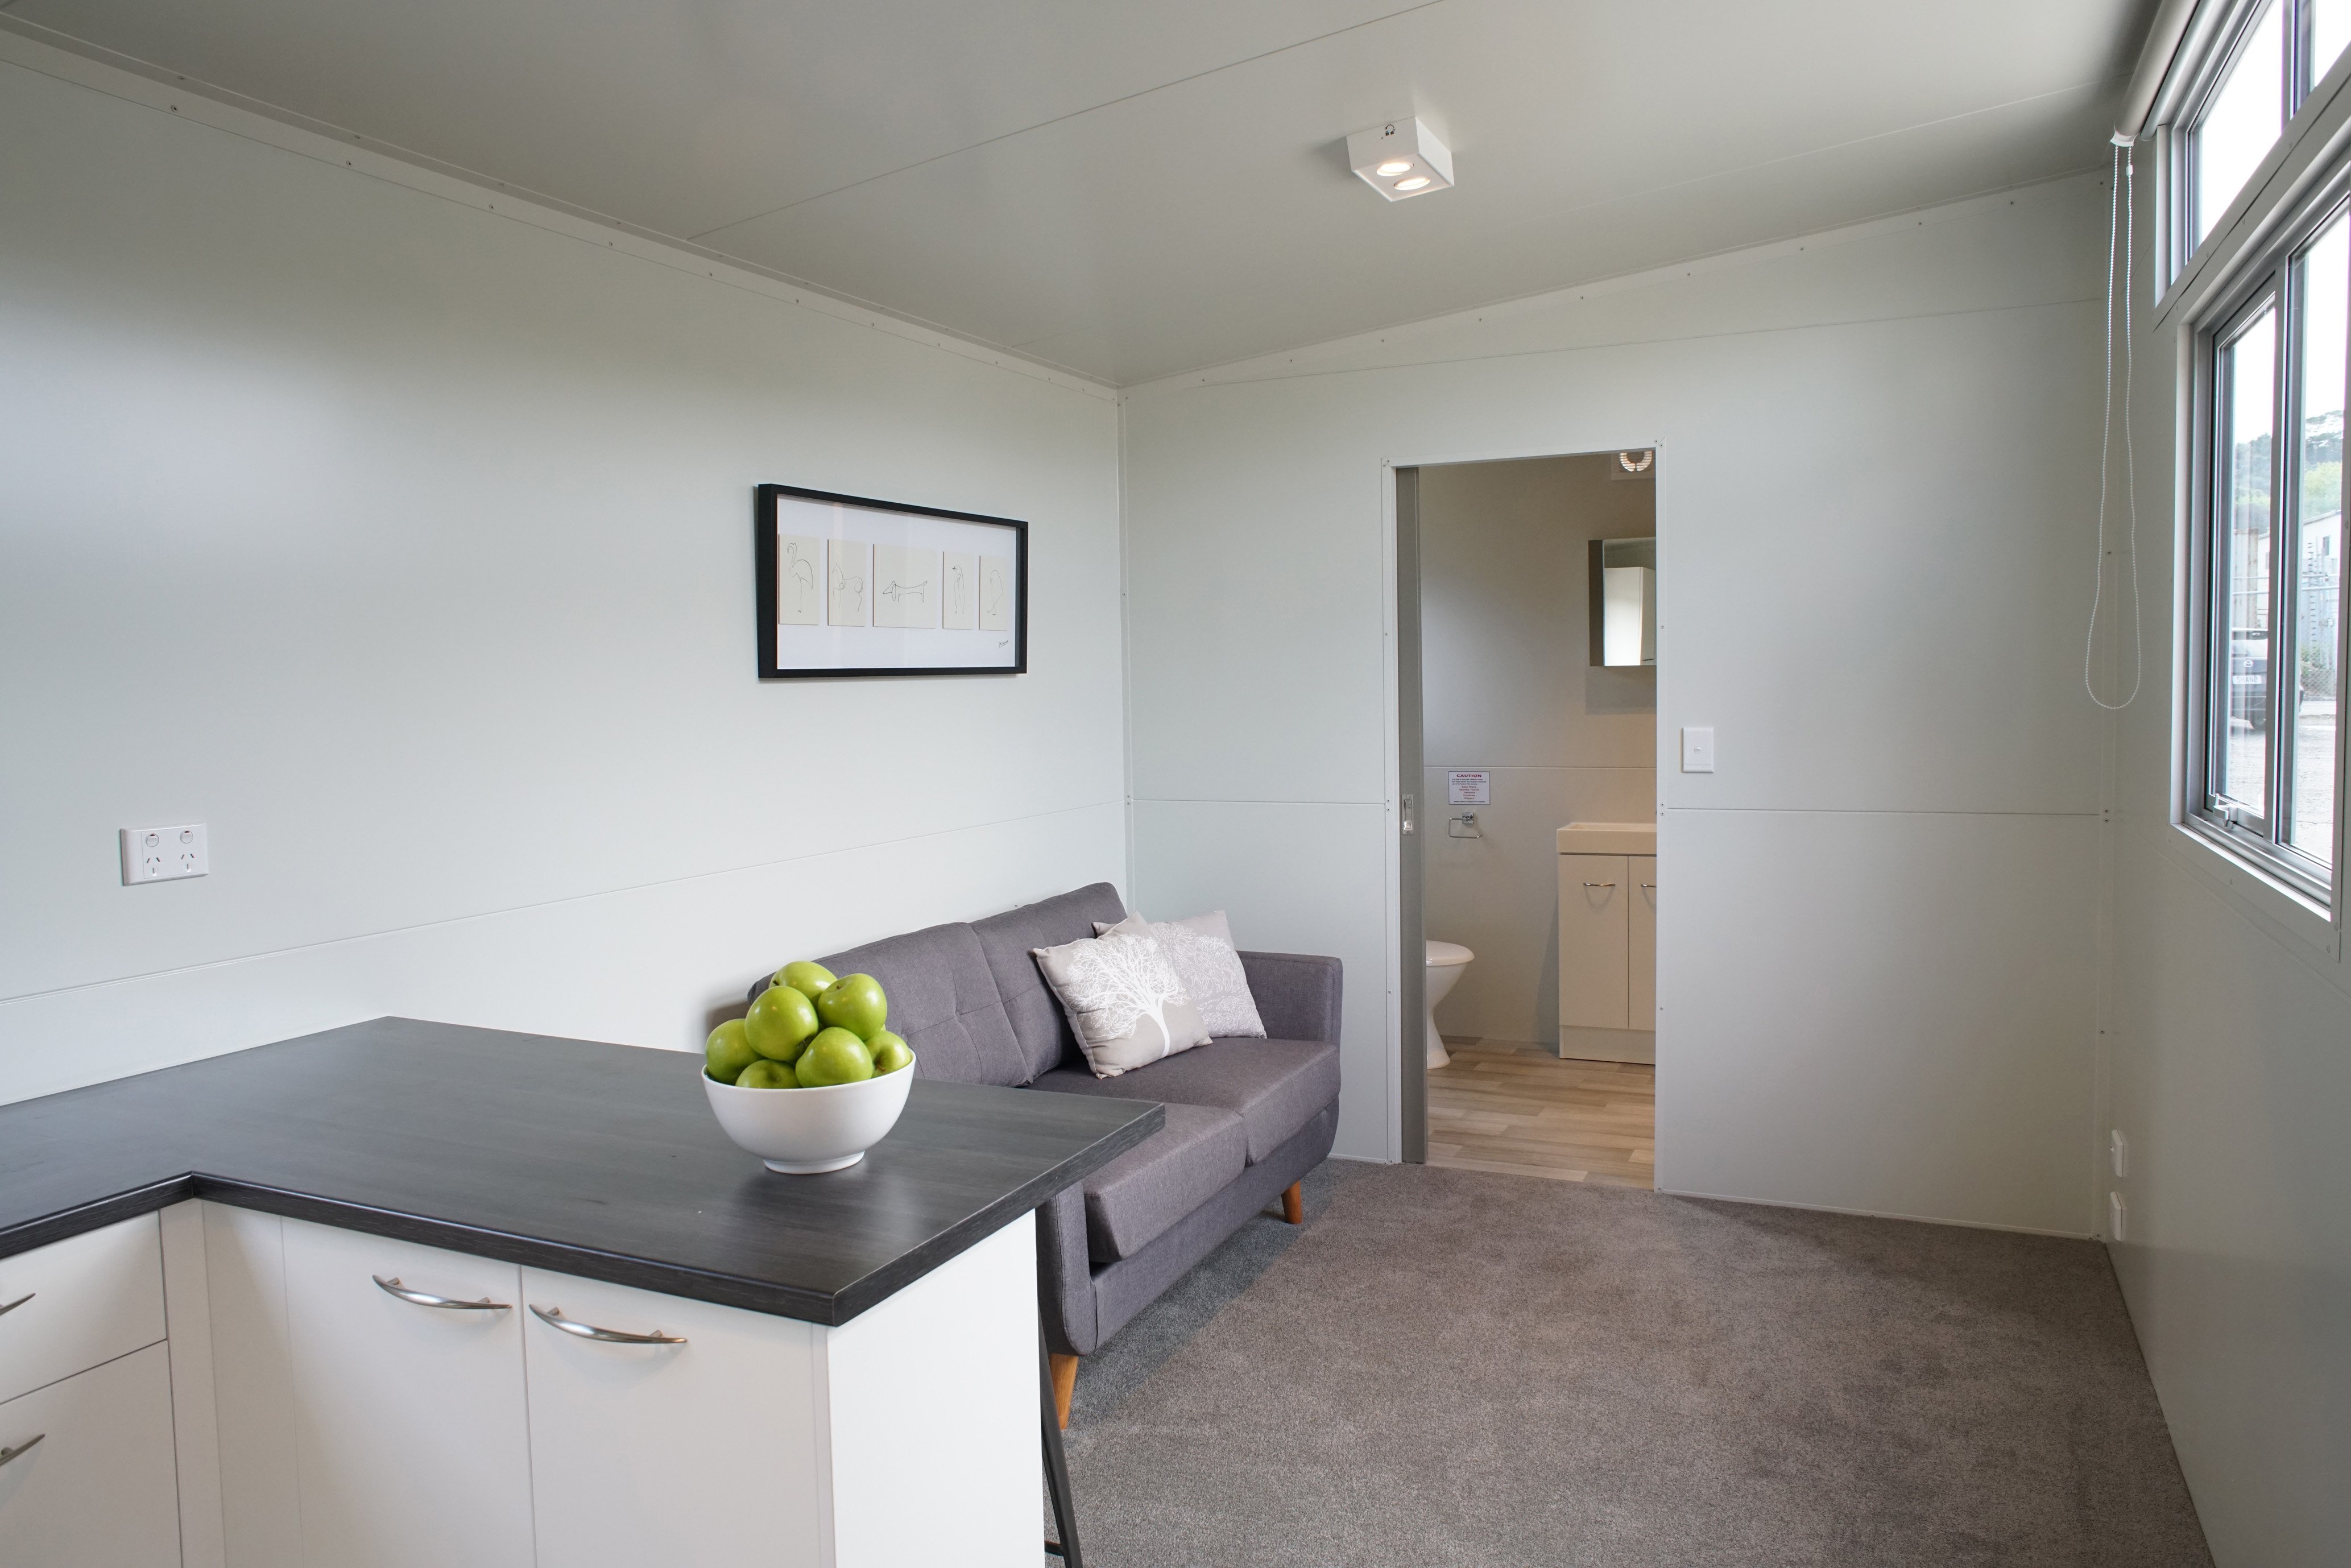 transportable home is available to view at our HouseMe Papakura Show home